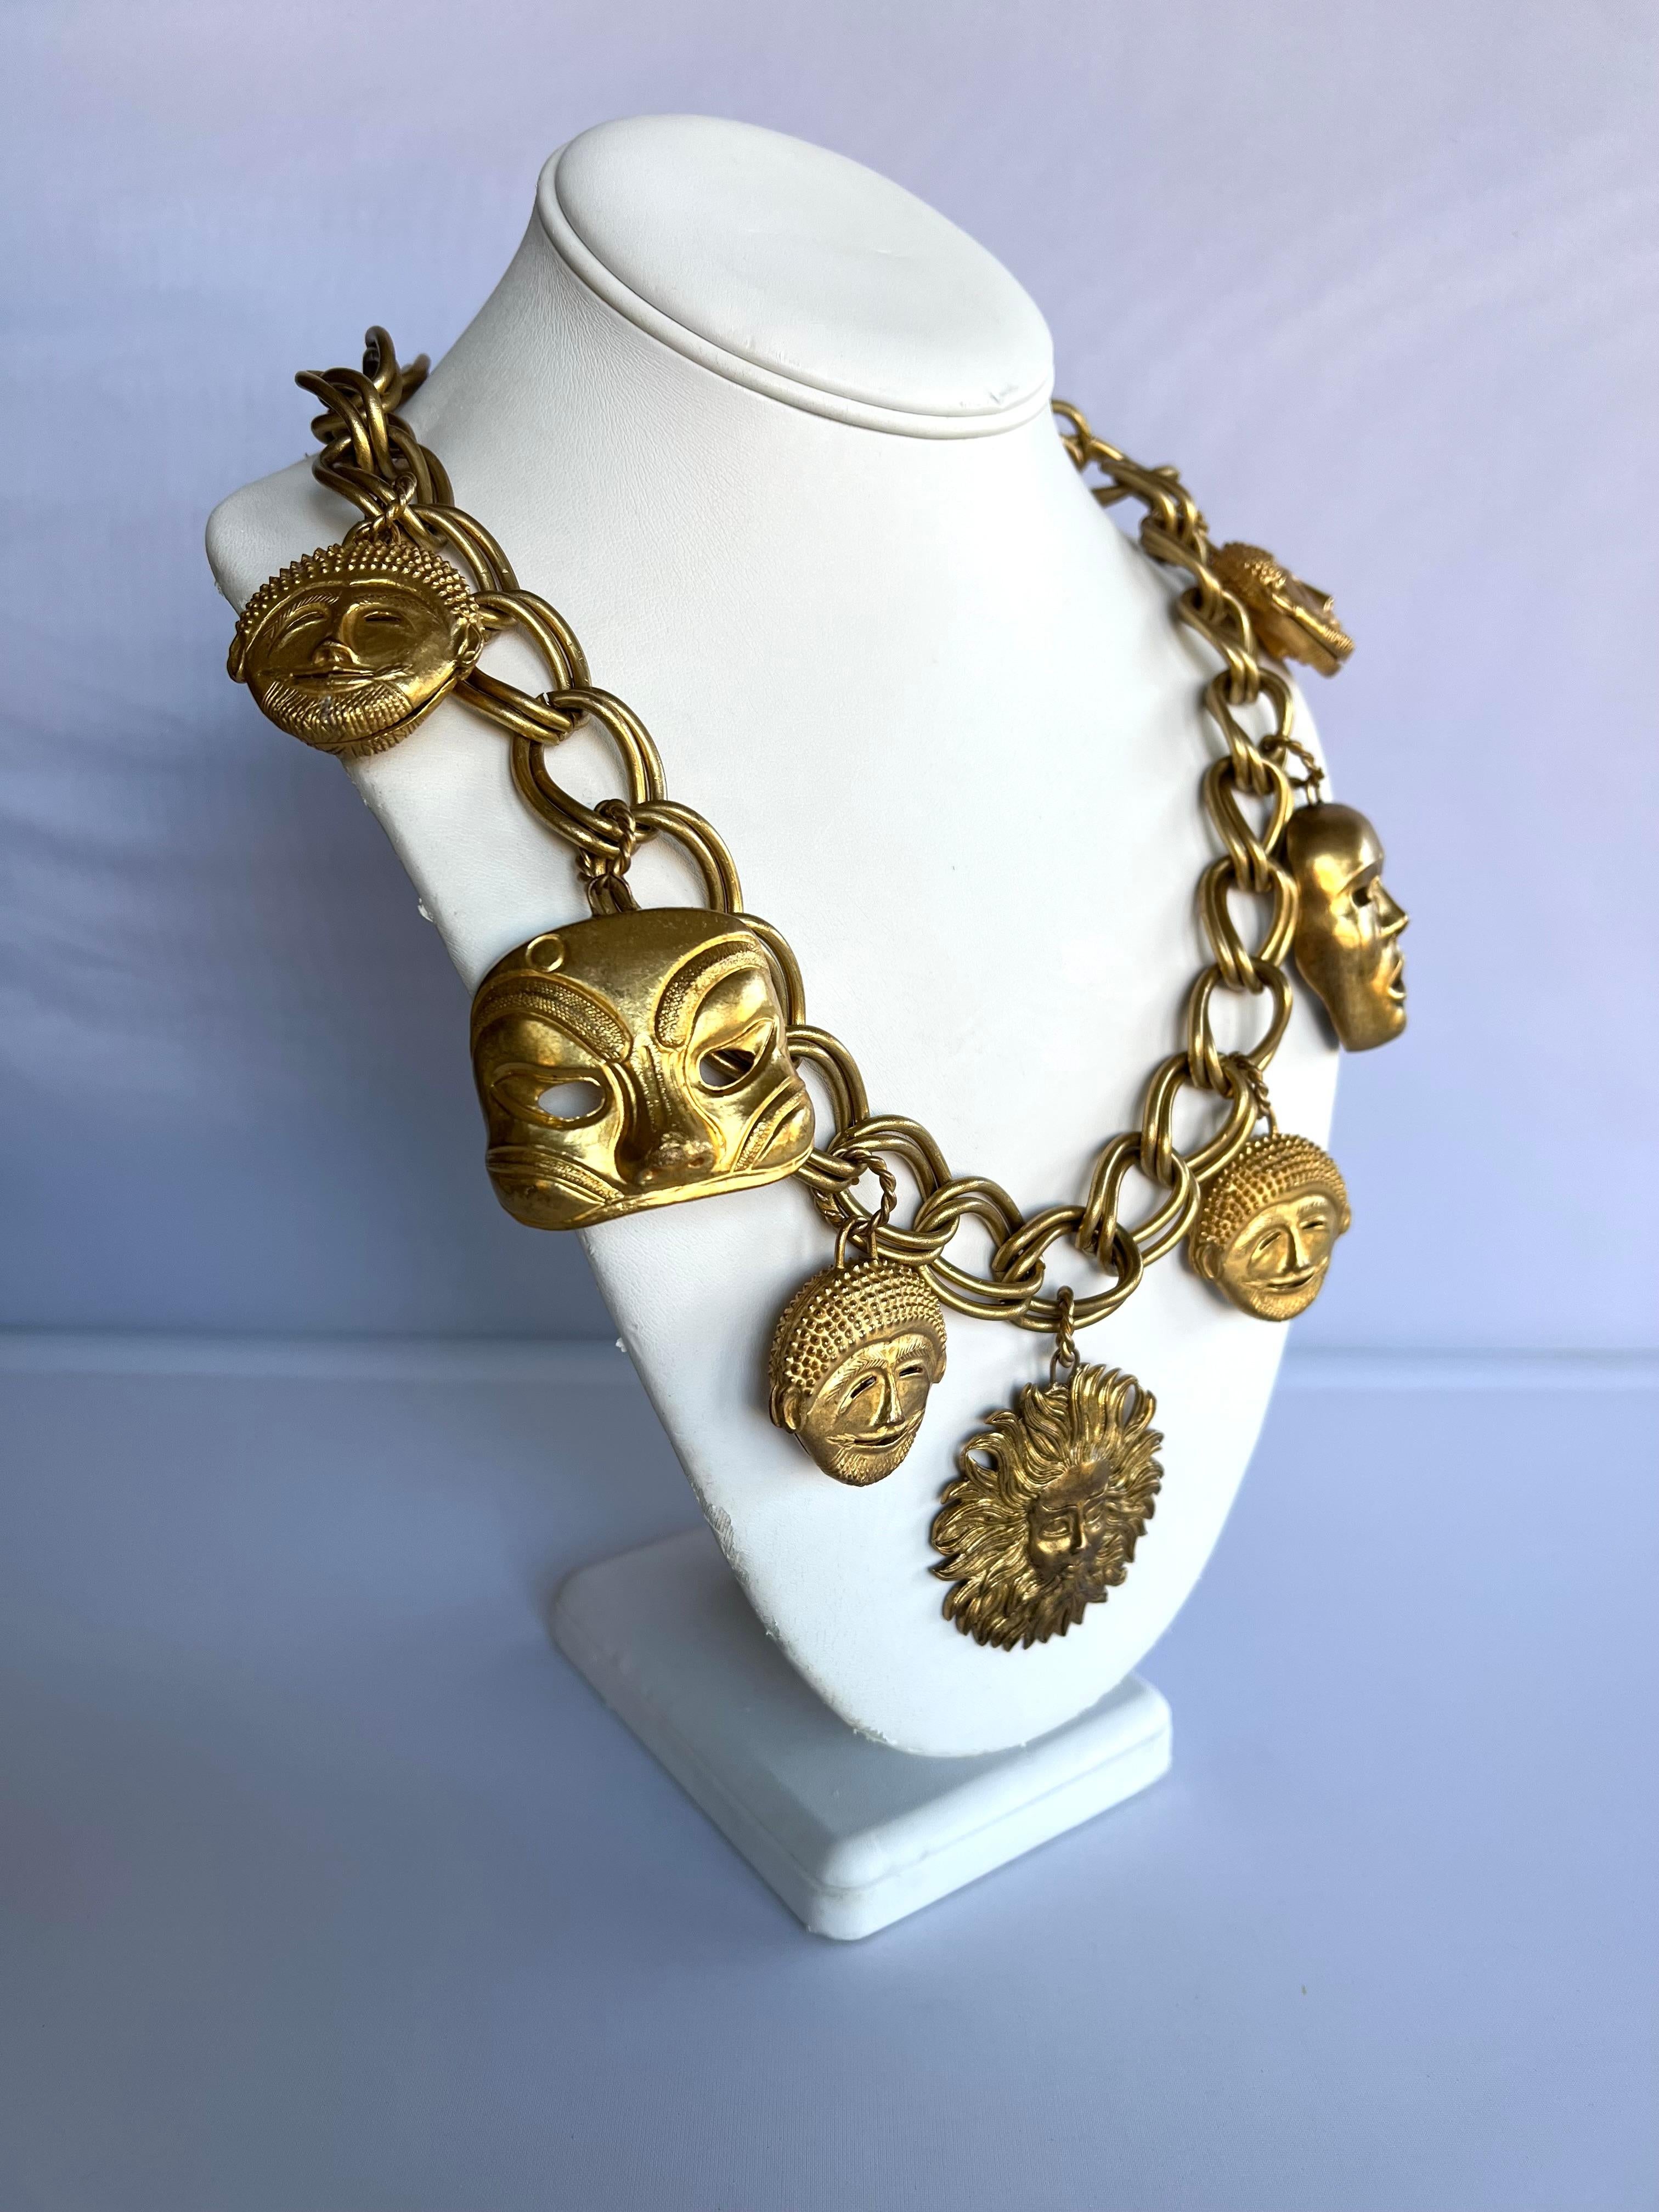 Scarce vintage chunky charm necklace by Isabel Canovas - comprised of gilt metal chain and detailed masks, made in Paris France. 

The matching earrings are listed on a separate listing.